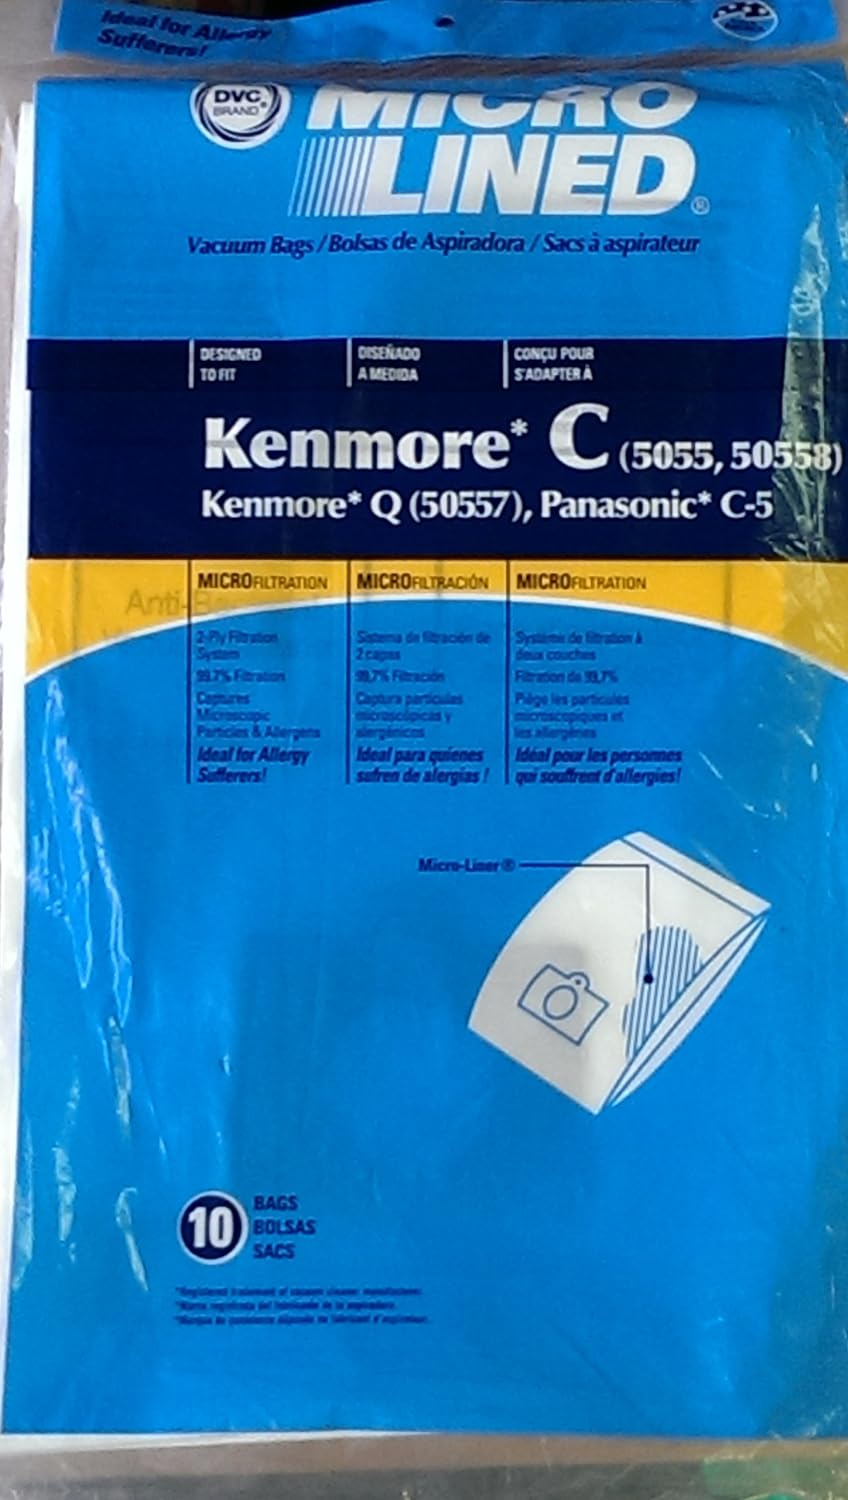 DVC For Type Q, Type C Canister Allergen Vacuum Cleaner Bags Fits 5055, 50557, 50558, 20-53290 and 50104